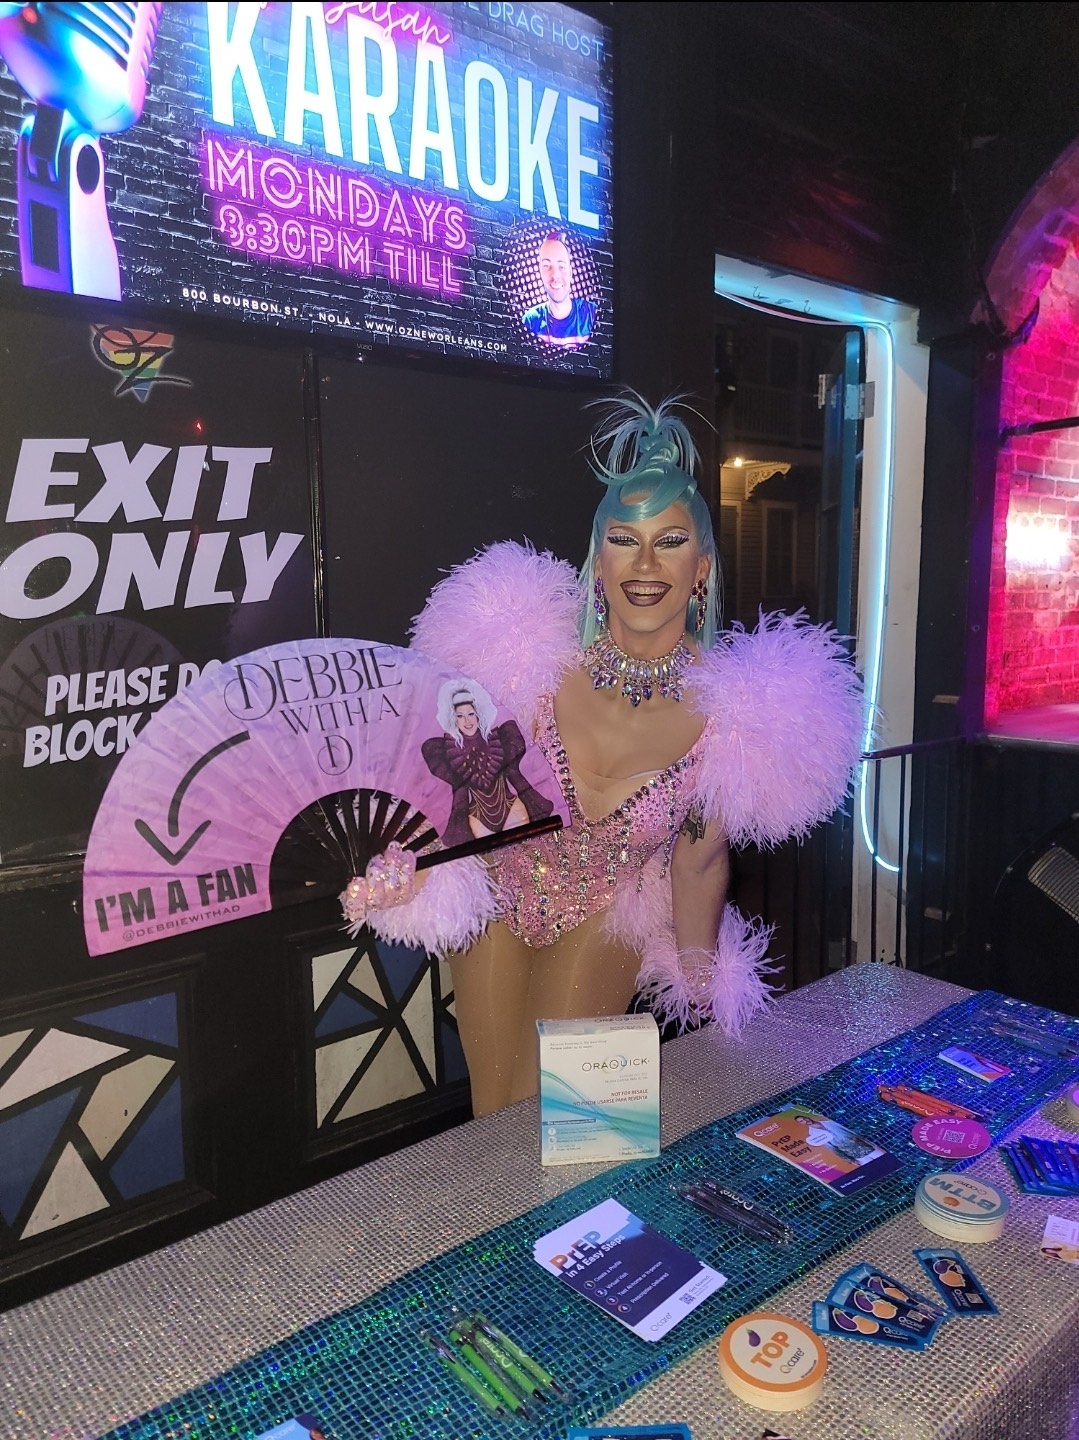 Drag queen stands behind a bedazzled resource table, holding a big pink fan and wearing a pink feather leotard.